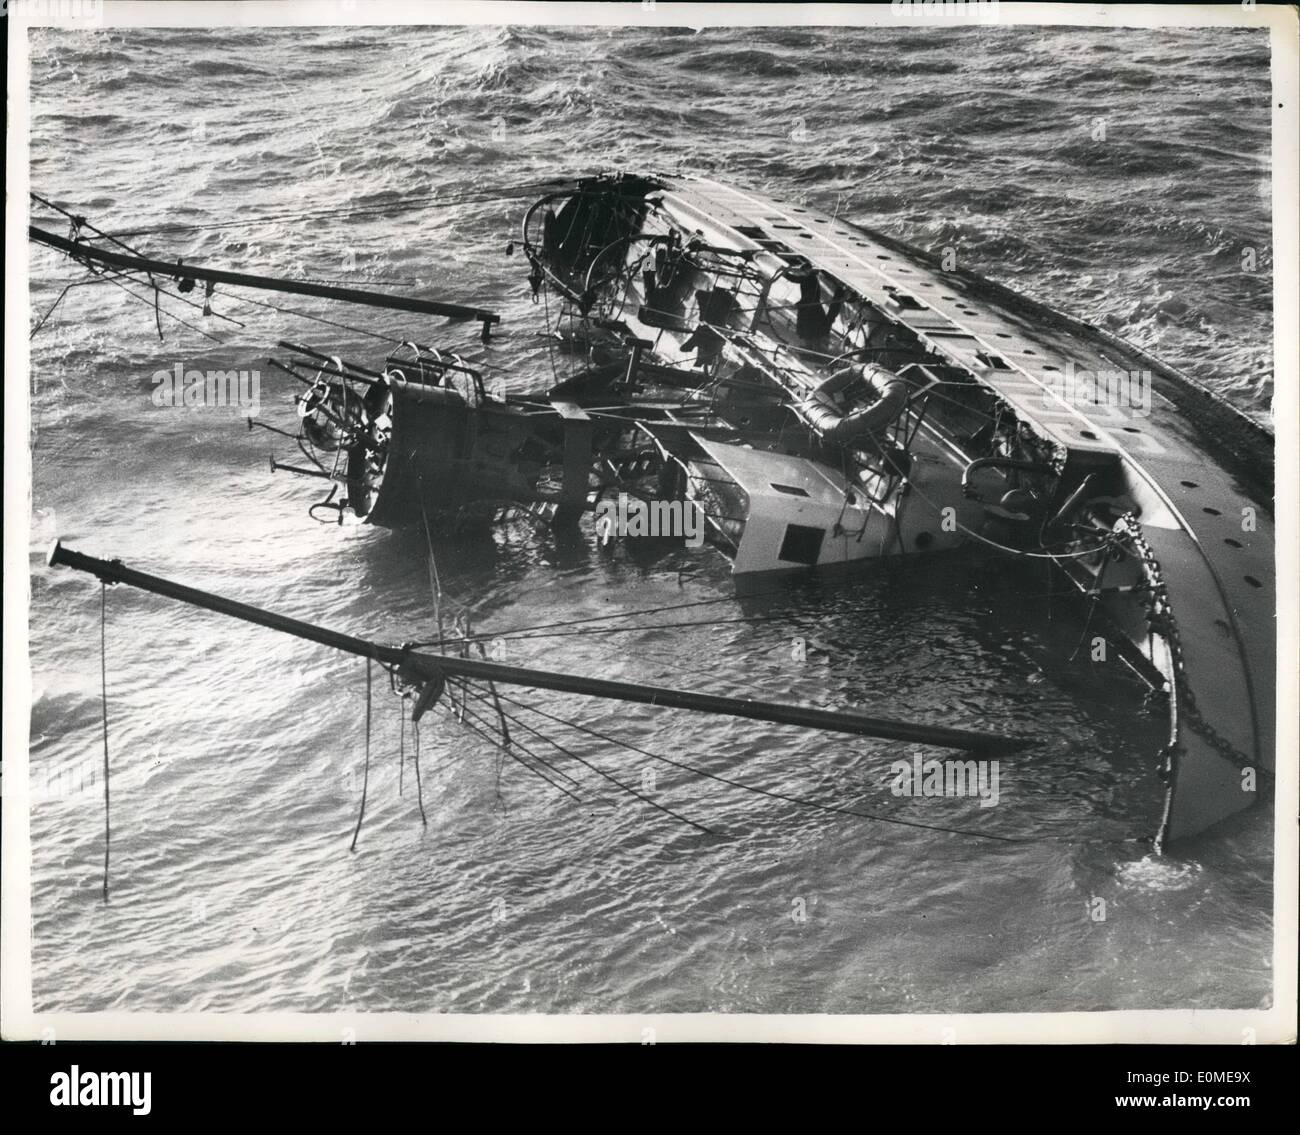 Nov. 11, 1954 - Eight trapped in wrecked Lightship. Man Stands on side of vessel.: Eight men are reported to be trapped in the hull of South Goodwin Lightship wrecked on the Goodwin Sands. One member of the crew was seen standing on the side of the hull - and he was hoisted to safety by a helicopter which flew to the scene. He said the remainder of the crew are trapped below- and the Trinity House vessel Vestral is dashing to the spot with oxy-acetykubg apparatus aboard. Photo shows Aerial view showing the vessel on her side - showing in centre - the man standing on her side. Stock Photo